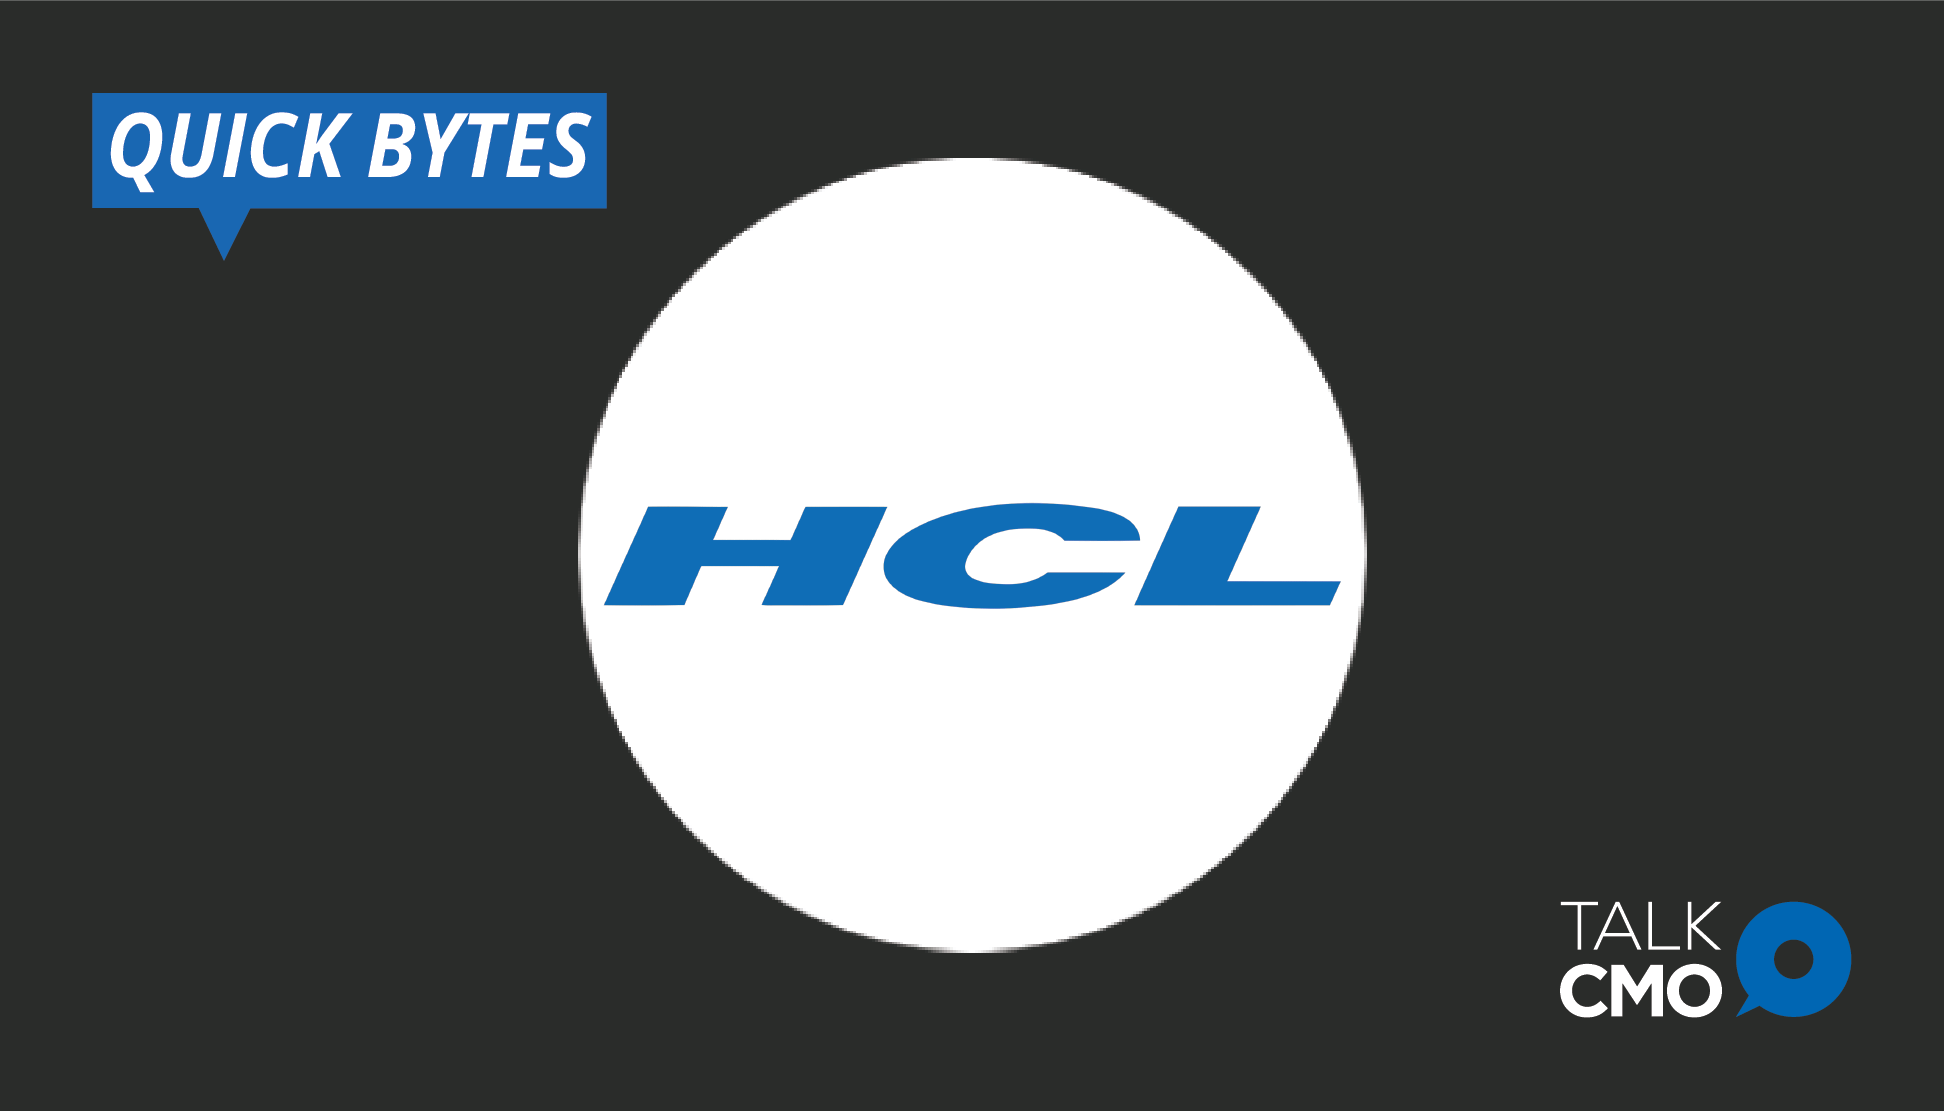 HCI logo, Vector Logo of HCI brand free download (eps, ai, png, cdr) formats